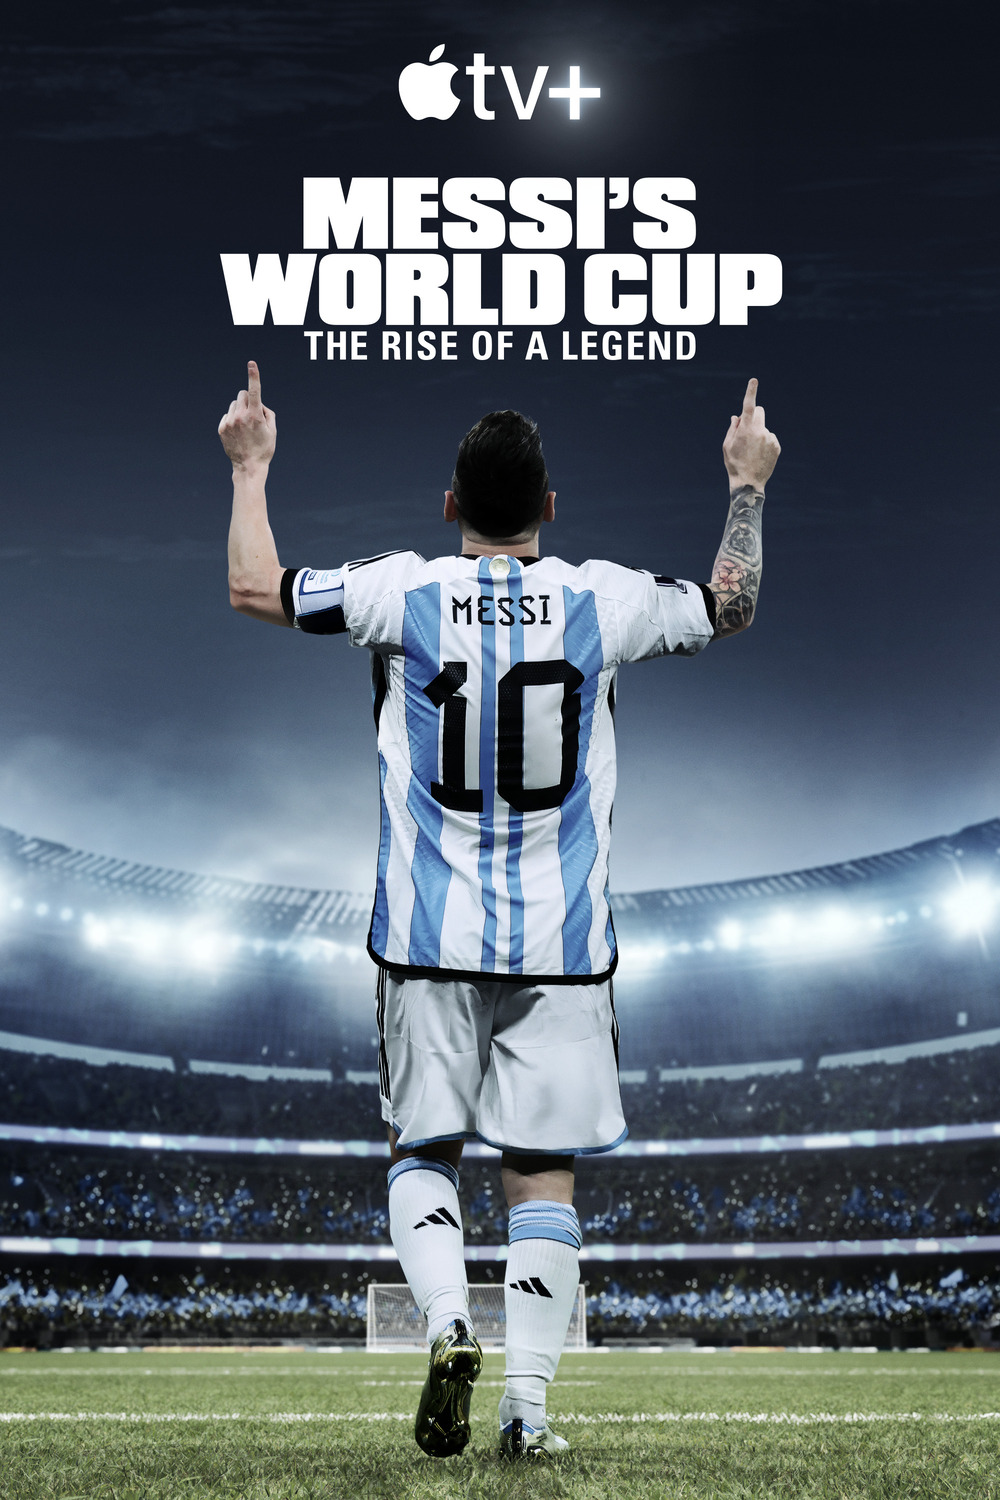 Extra Large TV Poster Image for Messi's World Cup: The Rise of a Legend (#1 of 2)